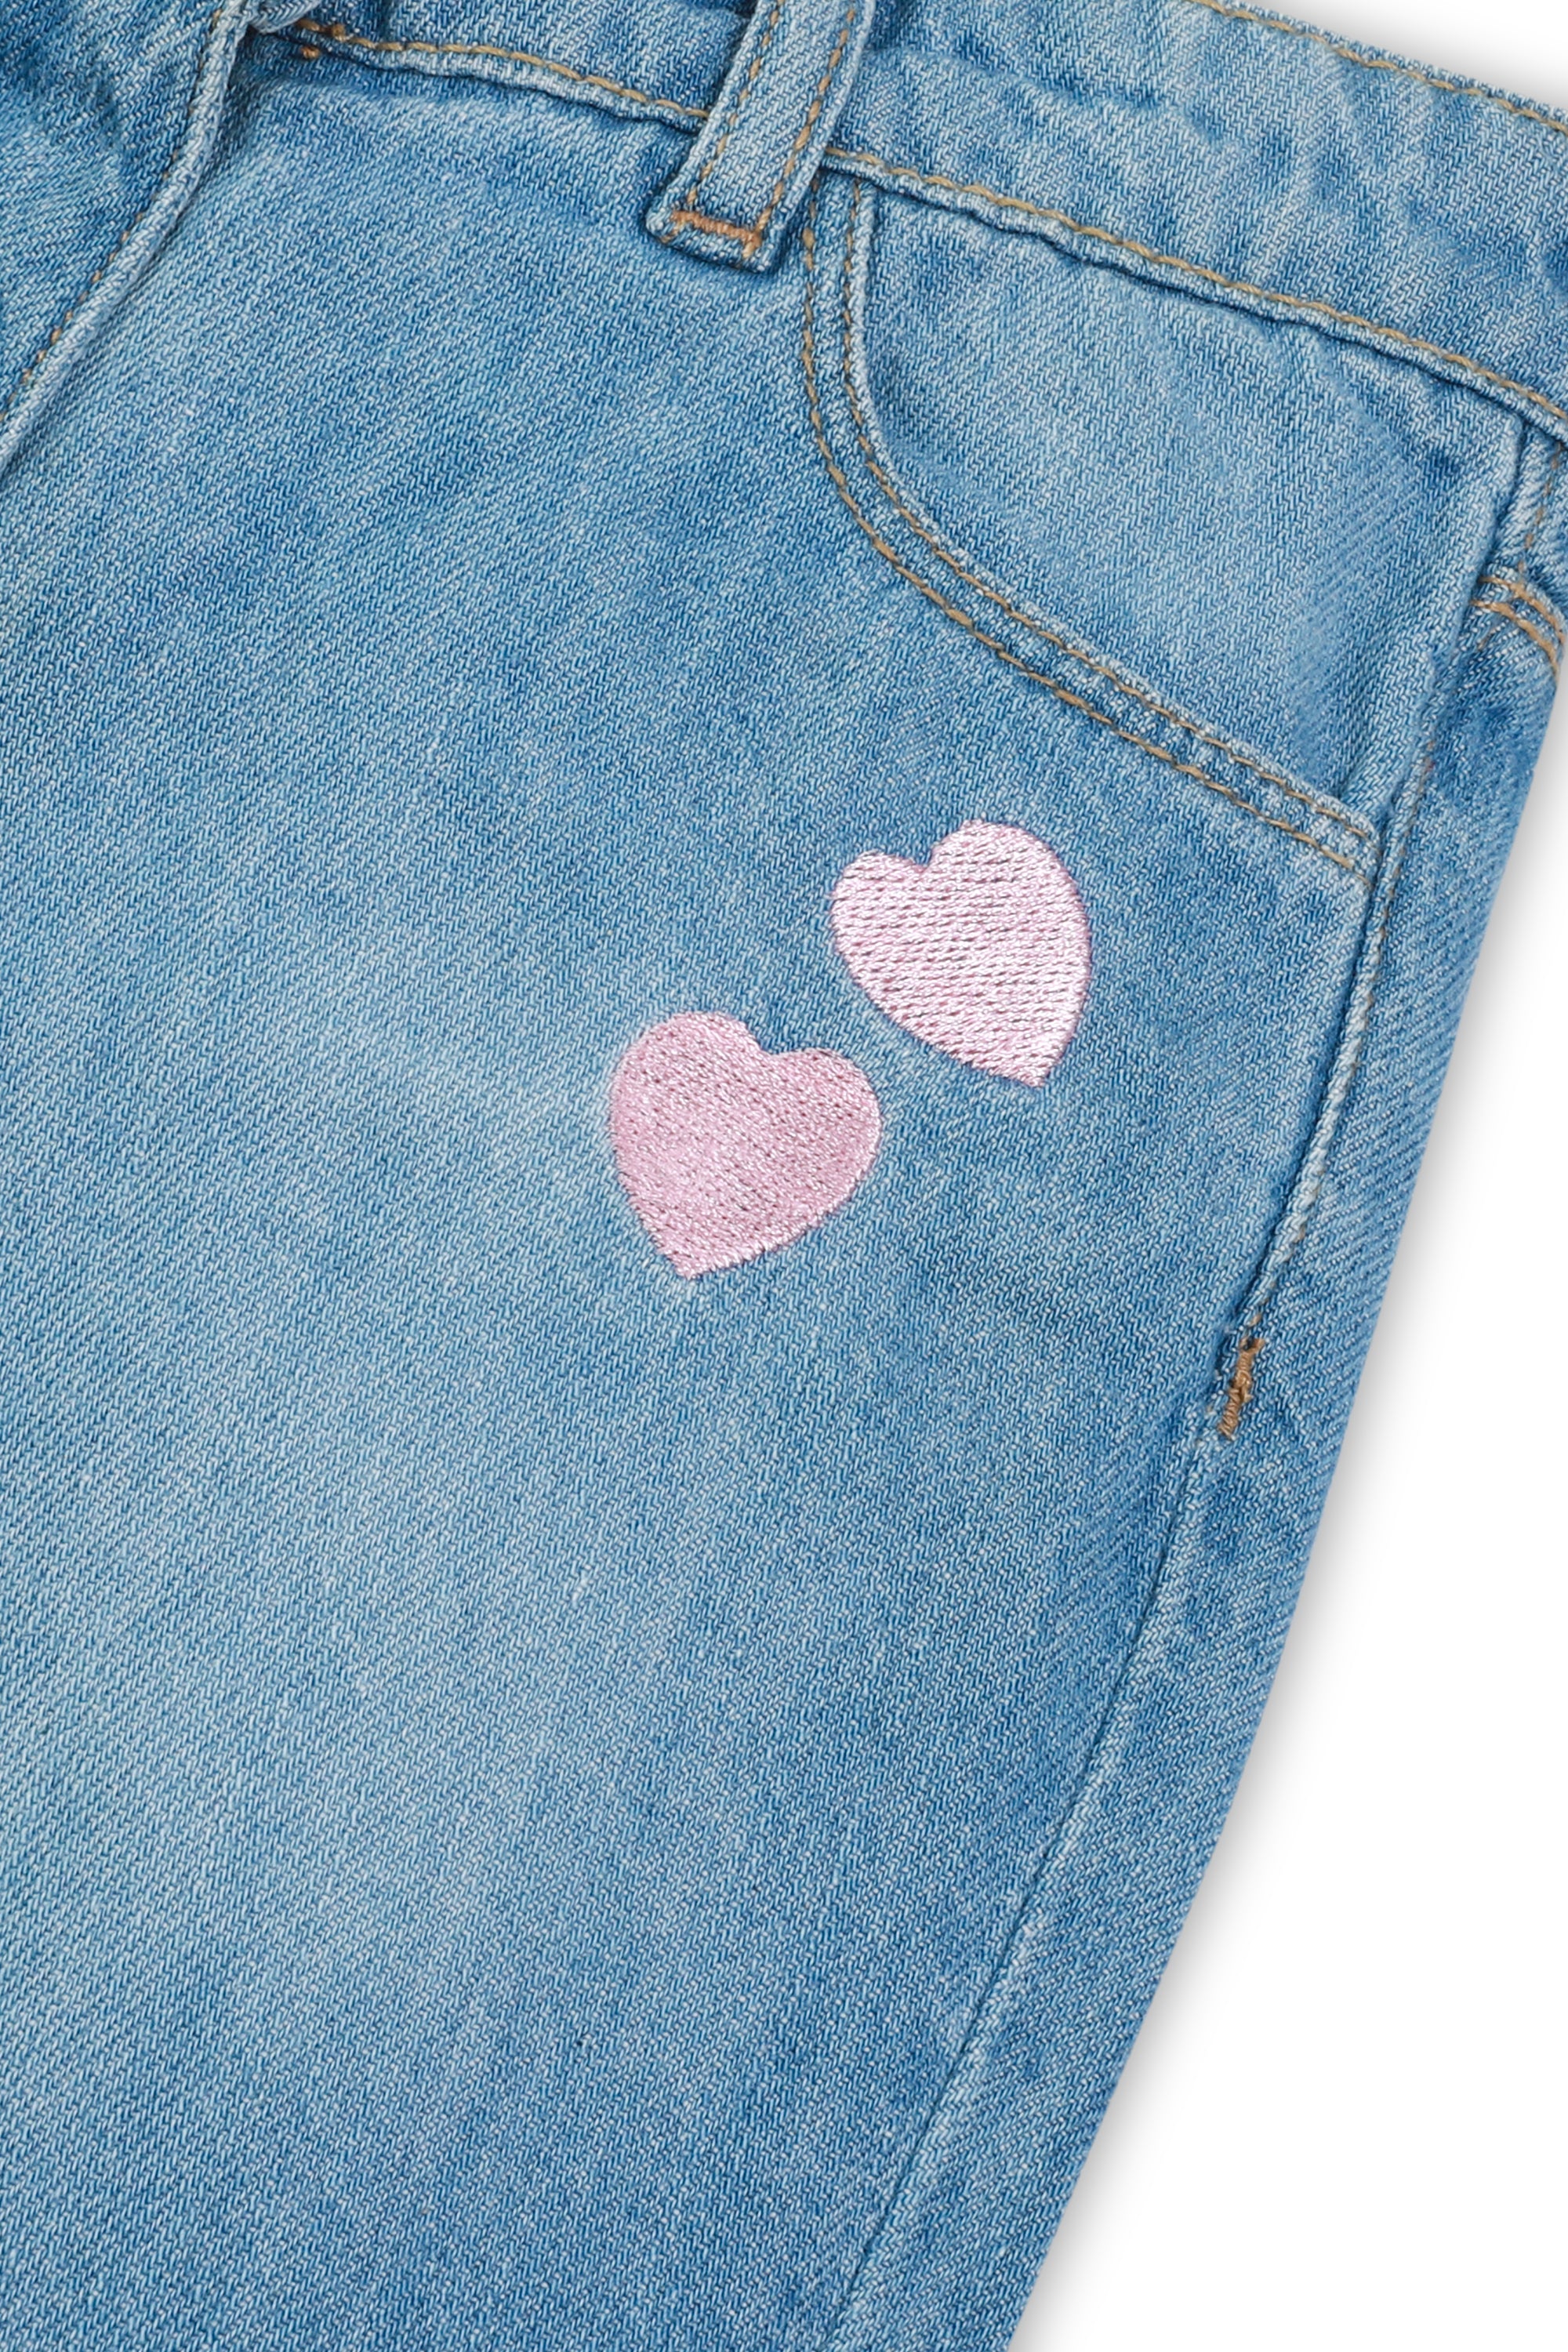 Sequin Hearts Embroidered Girl Jean Shorts